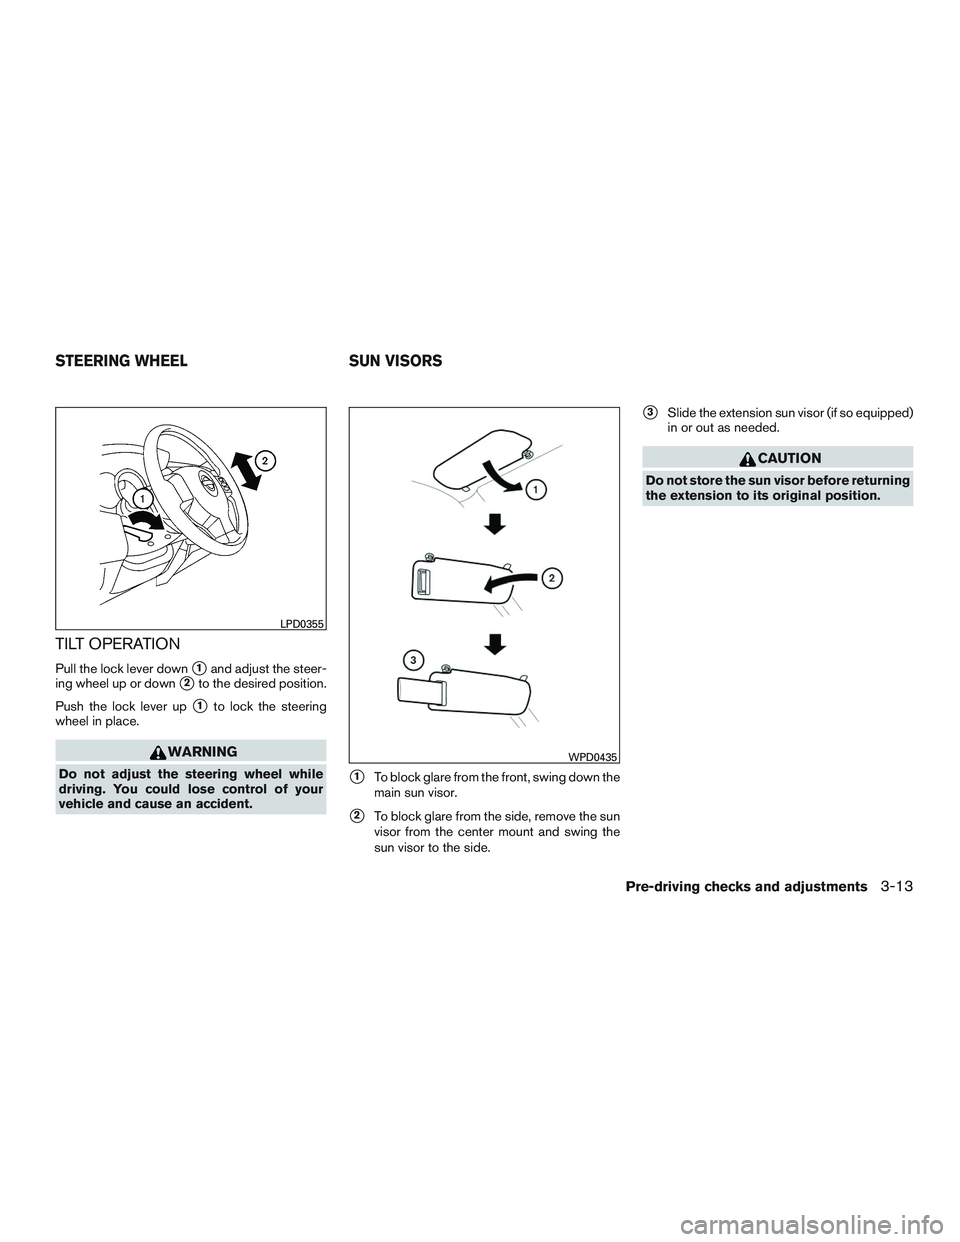 NISSAN MICRA 2014  Owners Manual TILT OPERATION
Pull the lock lever down1and adjust the steer-
ing wheel up or down
2to the desired position.
Push the lock lever up
1to lock the steering
wheel in place. 